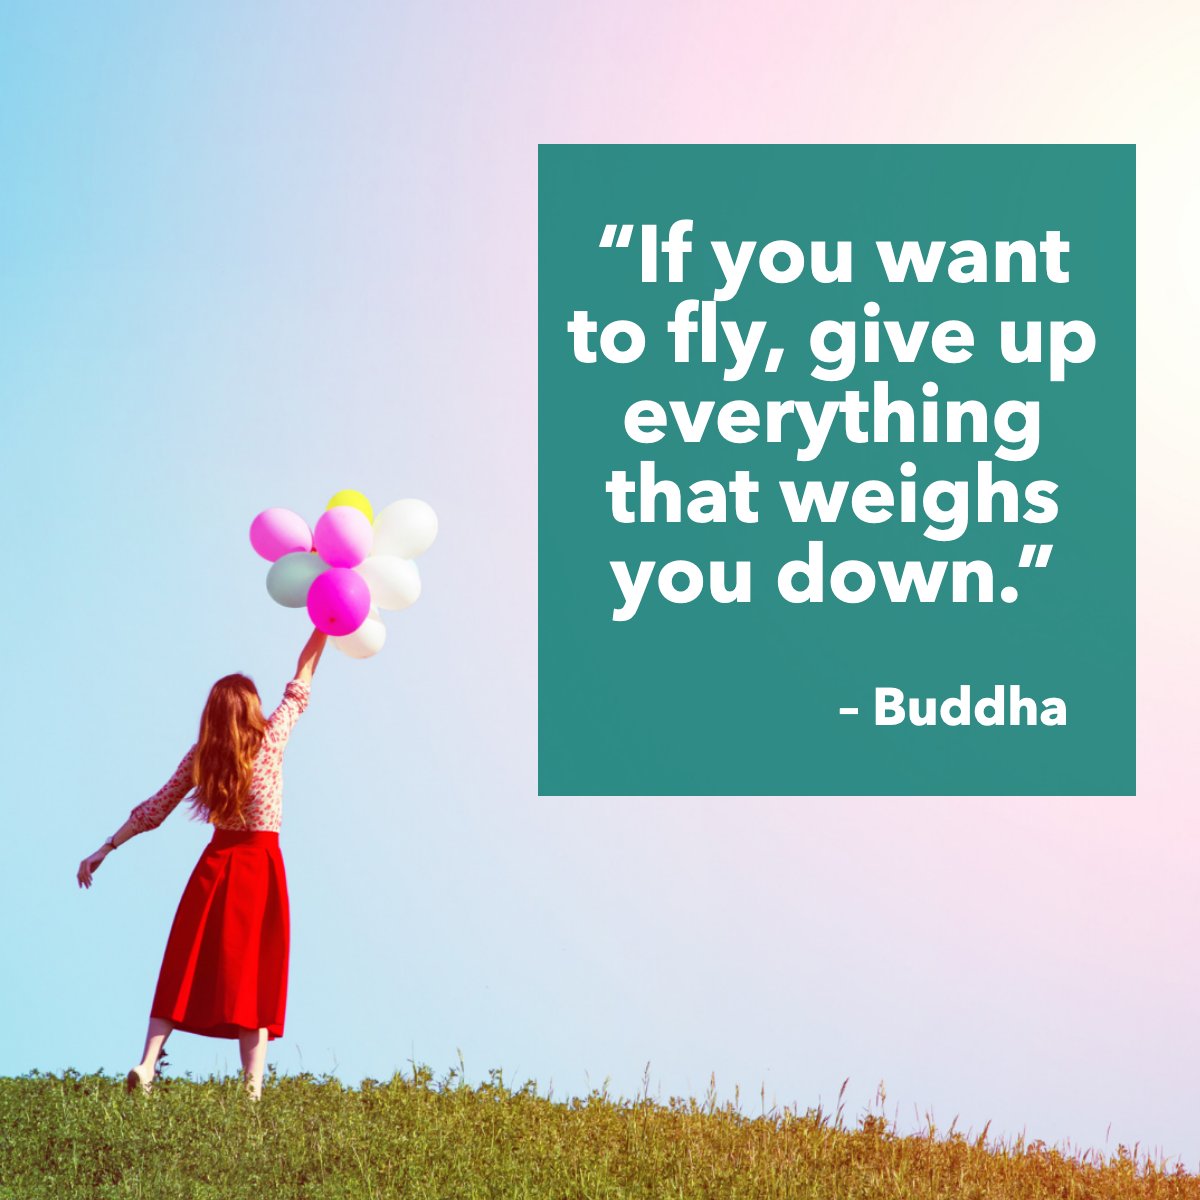 'If you want to flye, give up everything that weights you down'

-Buddha

#buddha #buddhaquotes  #quotegram #quoteoftheday✏️
 #veteranhomebuyers #militaryhomebuyers #veteransellinghome #militarysellinghome #PCSmove #militaryPCS #veteranrealtor #militaryrealtor